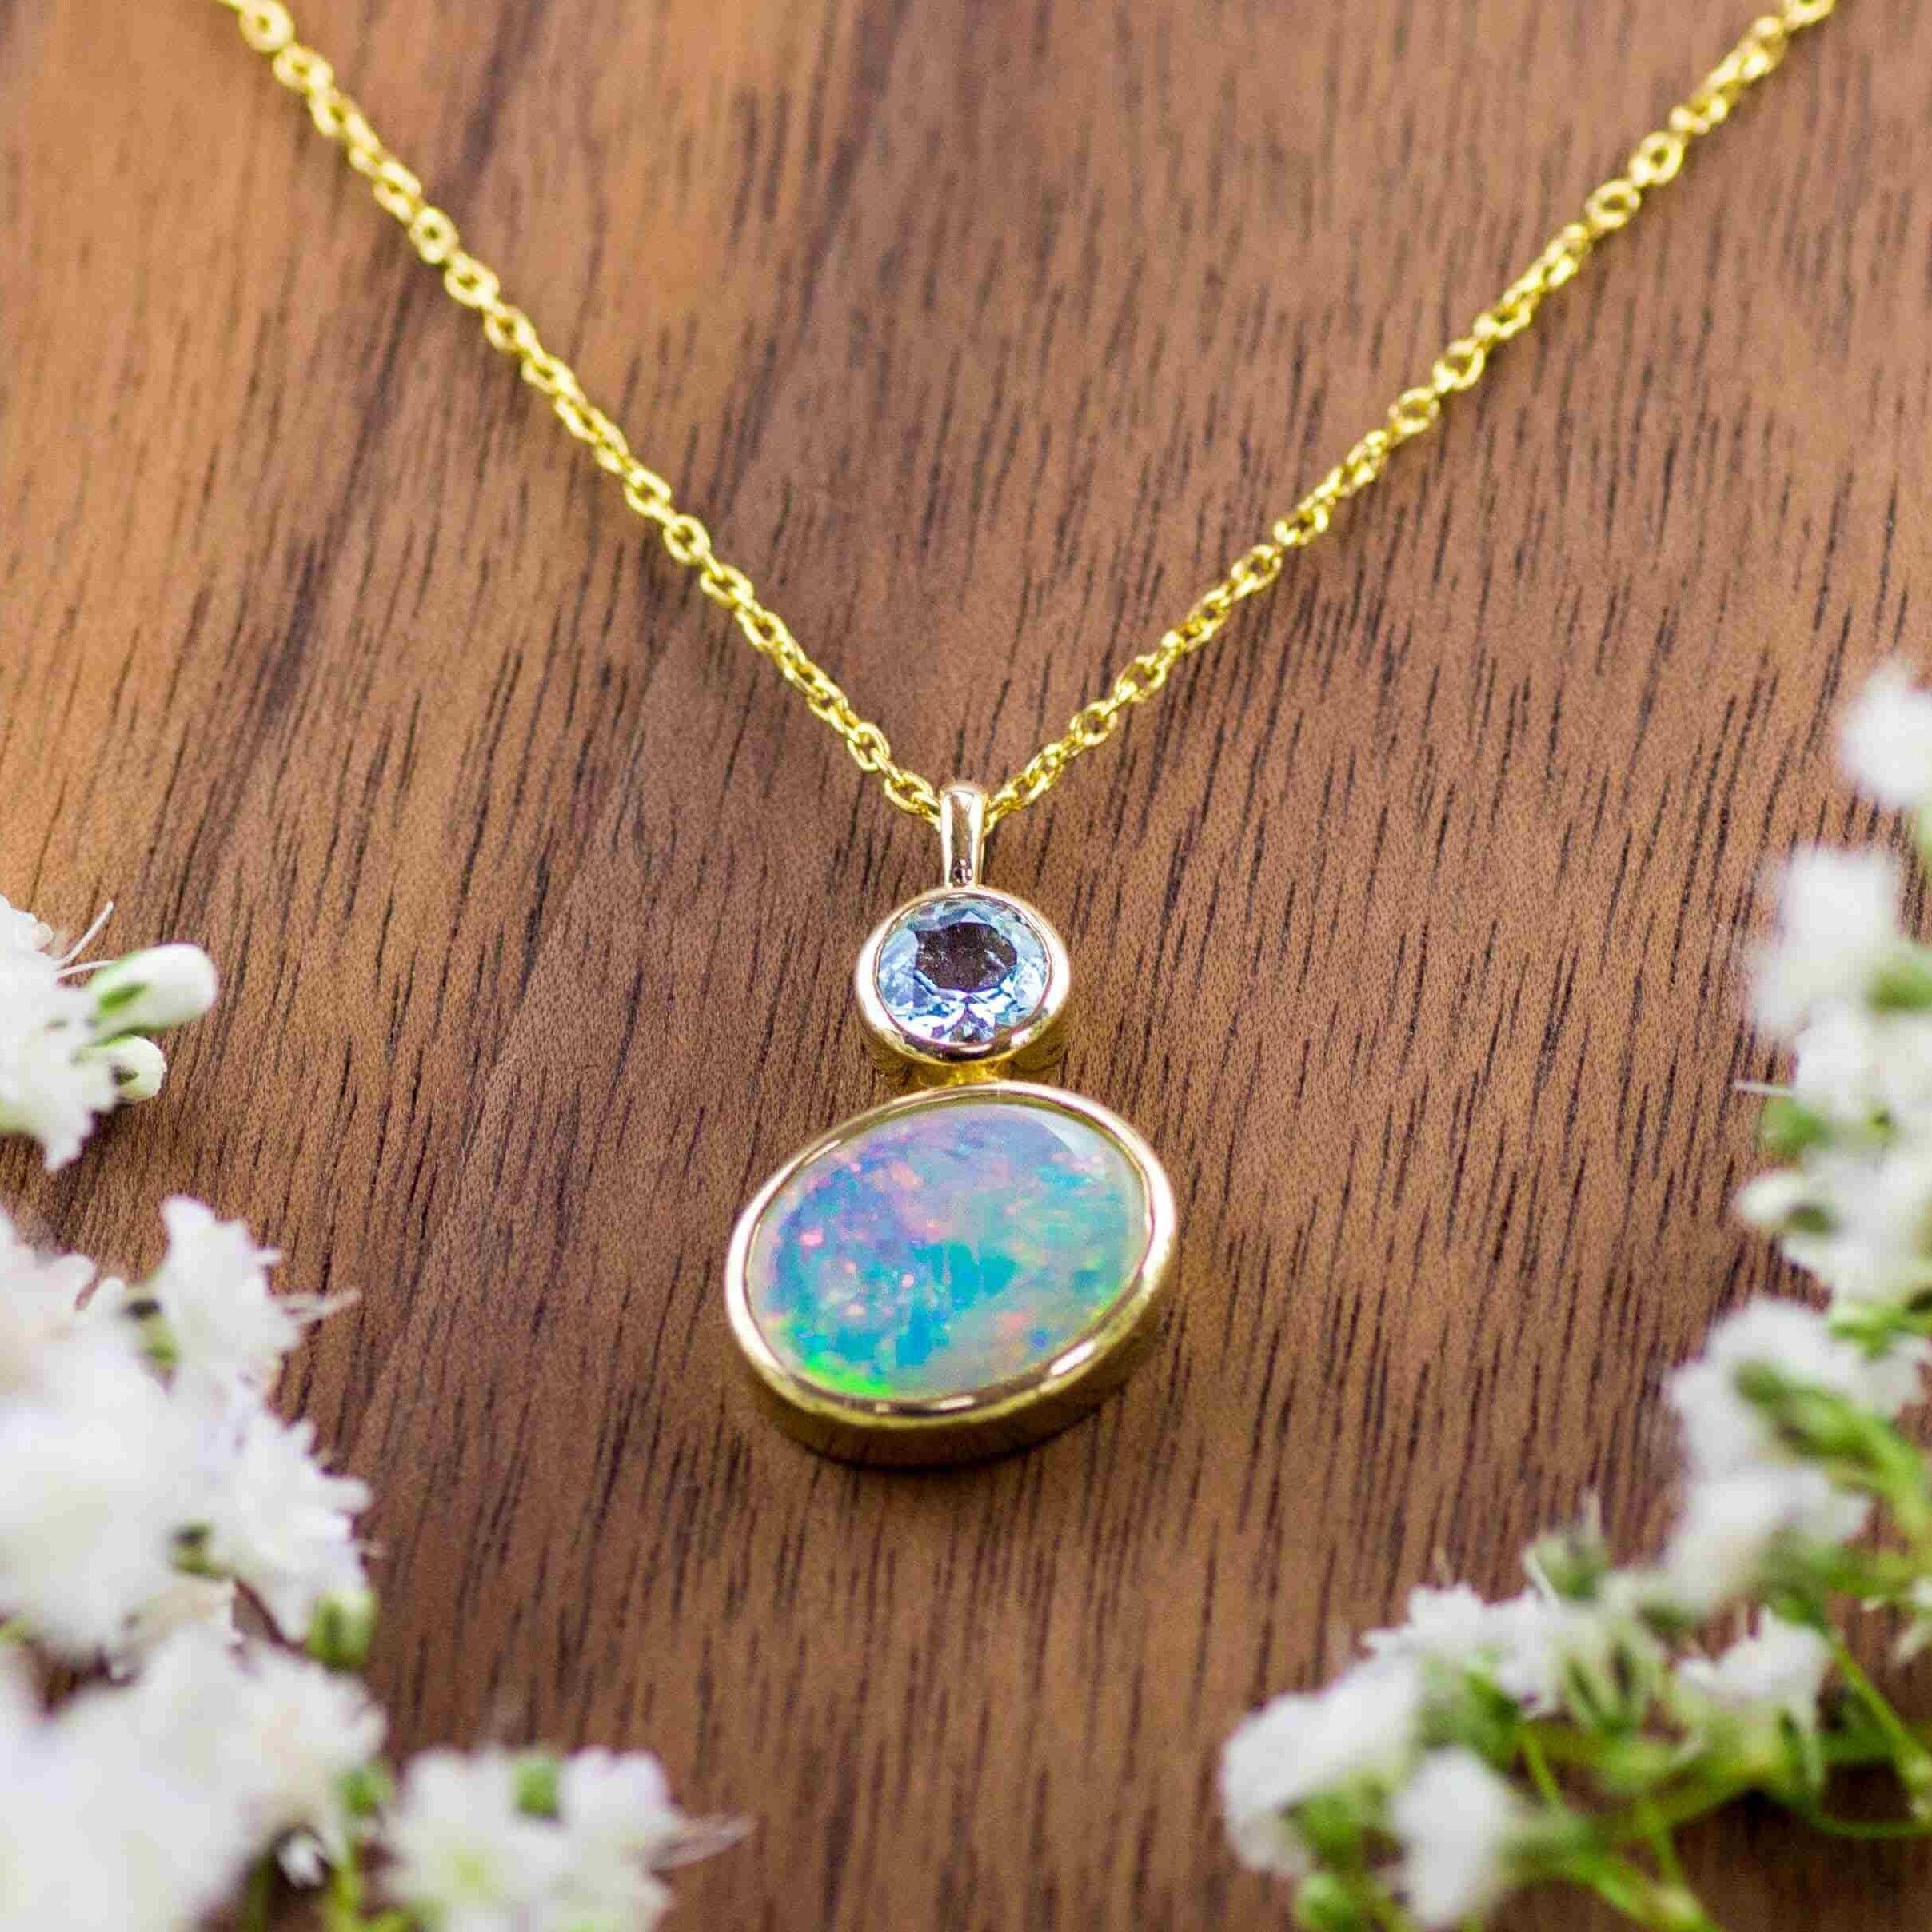 New 9ct Yellow Gold Cultured Opal Pendant & 18